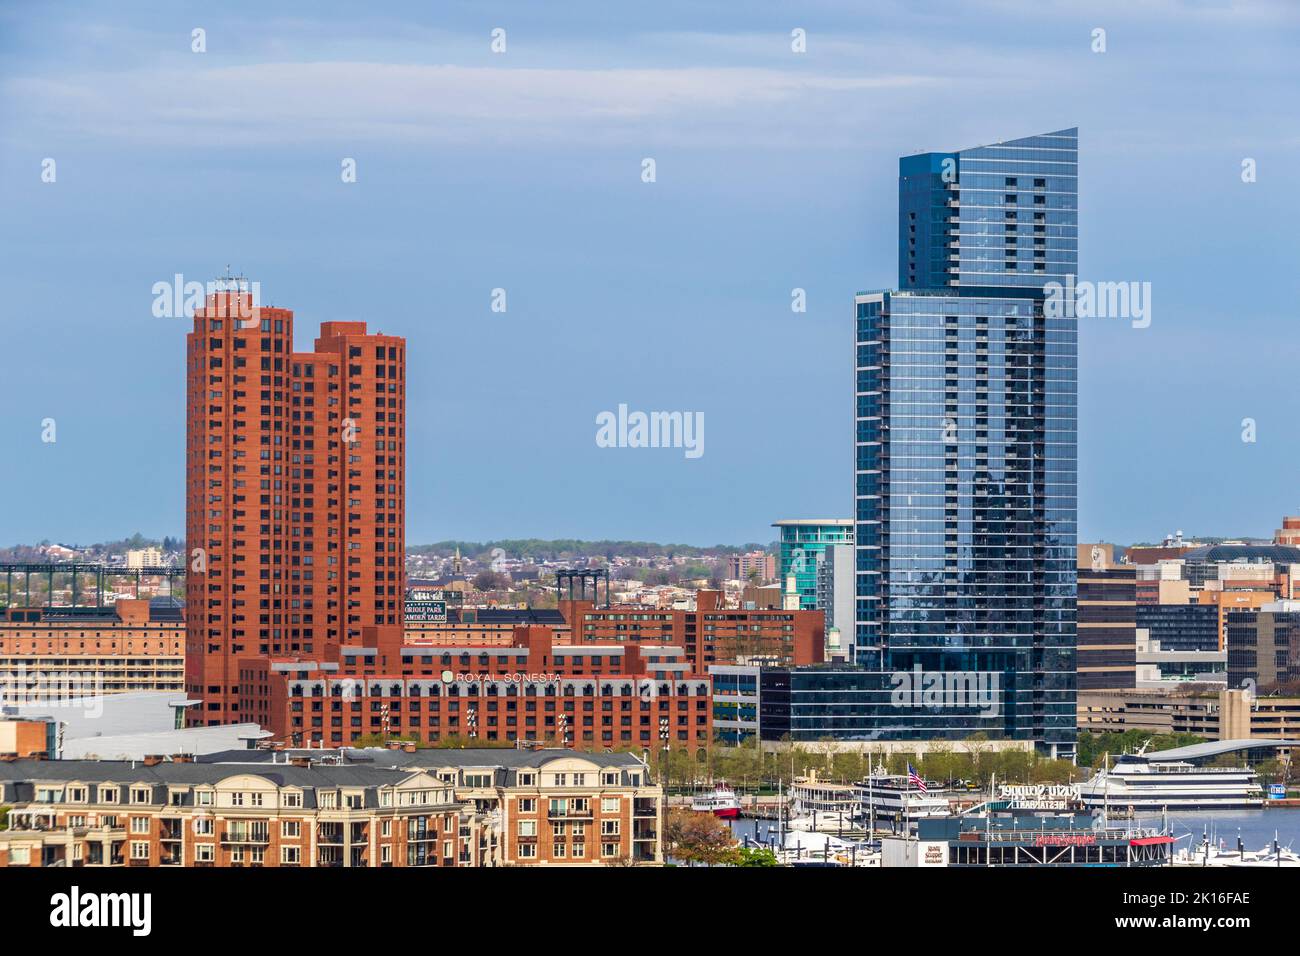 Baltimore Inner Harbor, Baltimore Maryland, with luxury high-rise living complexes representing the urban renaissance of the Inner Harbor area. Stock Photo